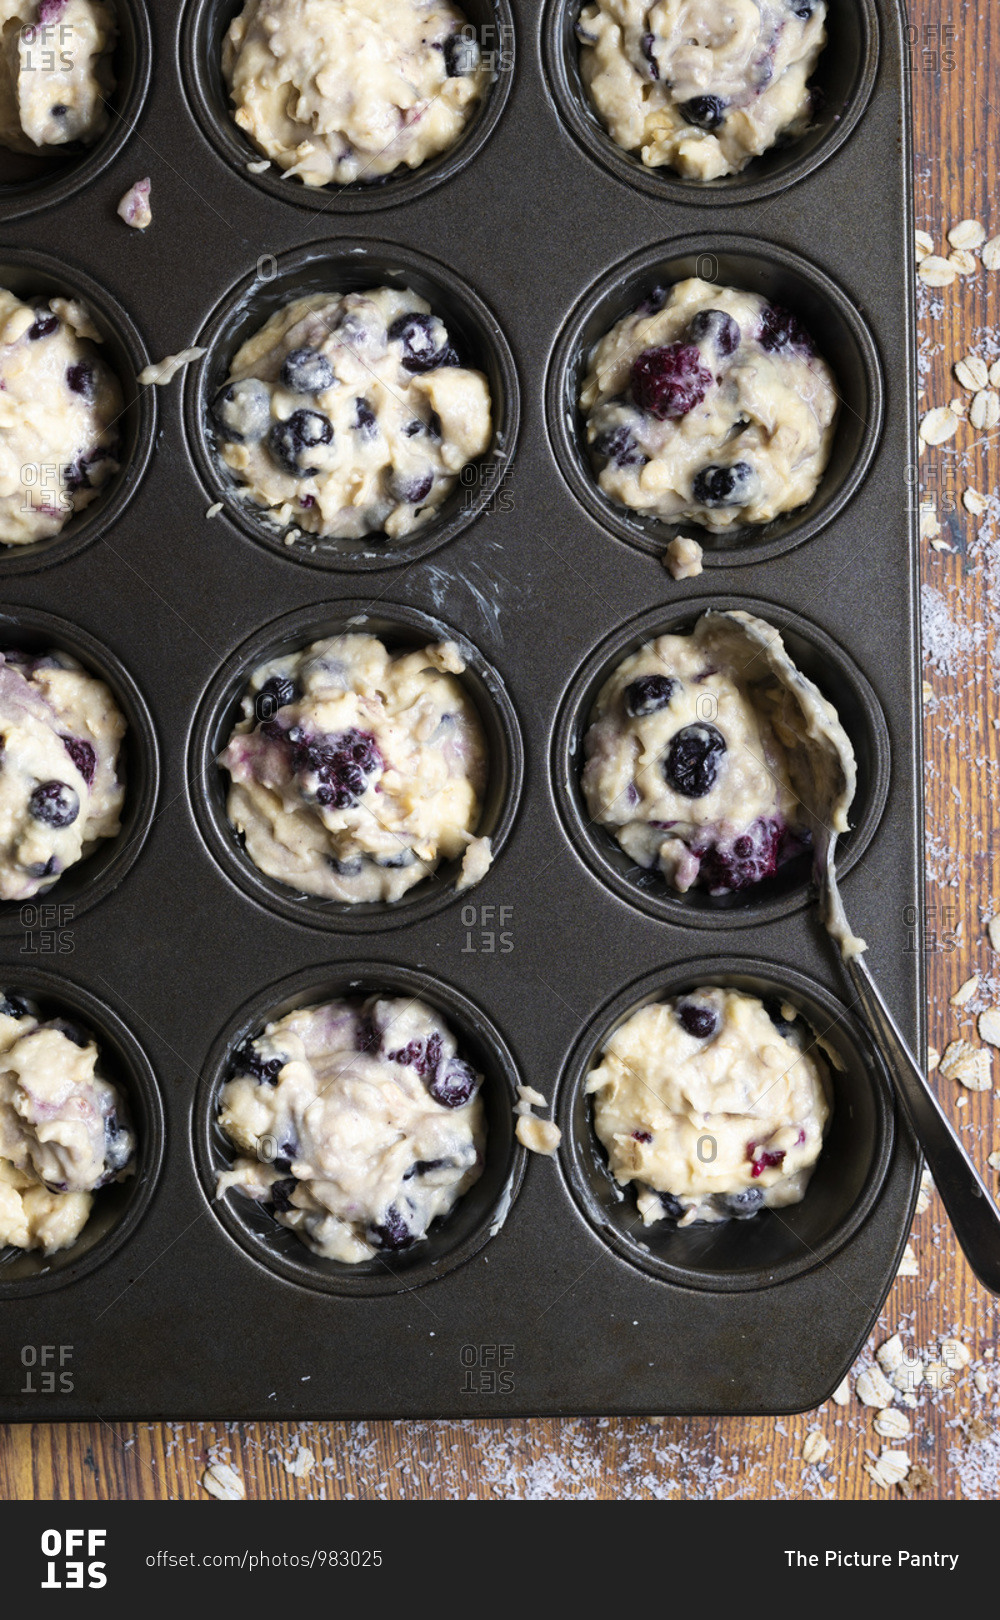 Mixed berry and oat muffin batter spooned into a patty cake pan.